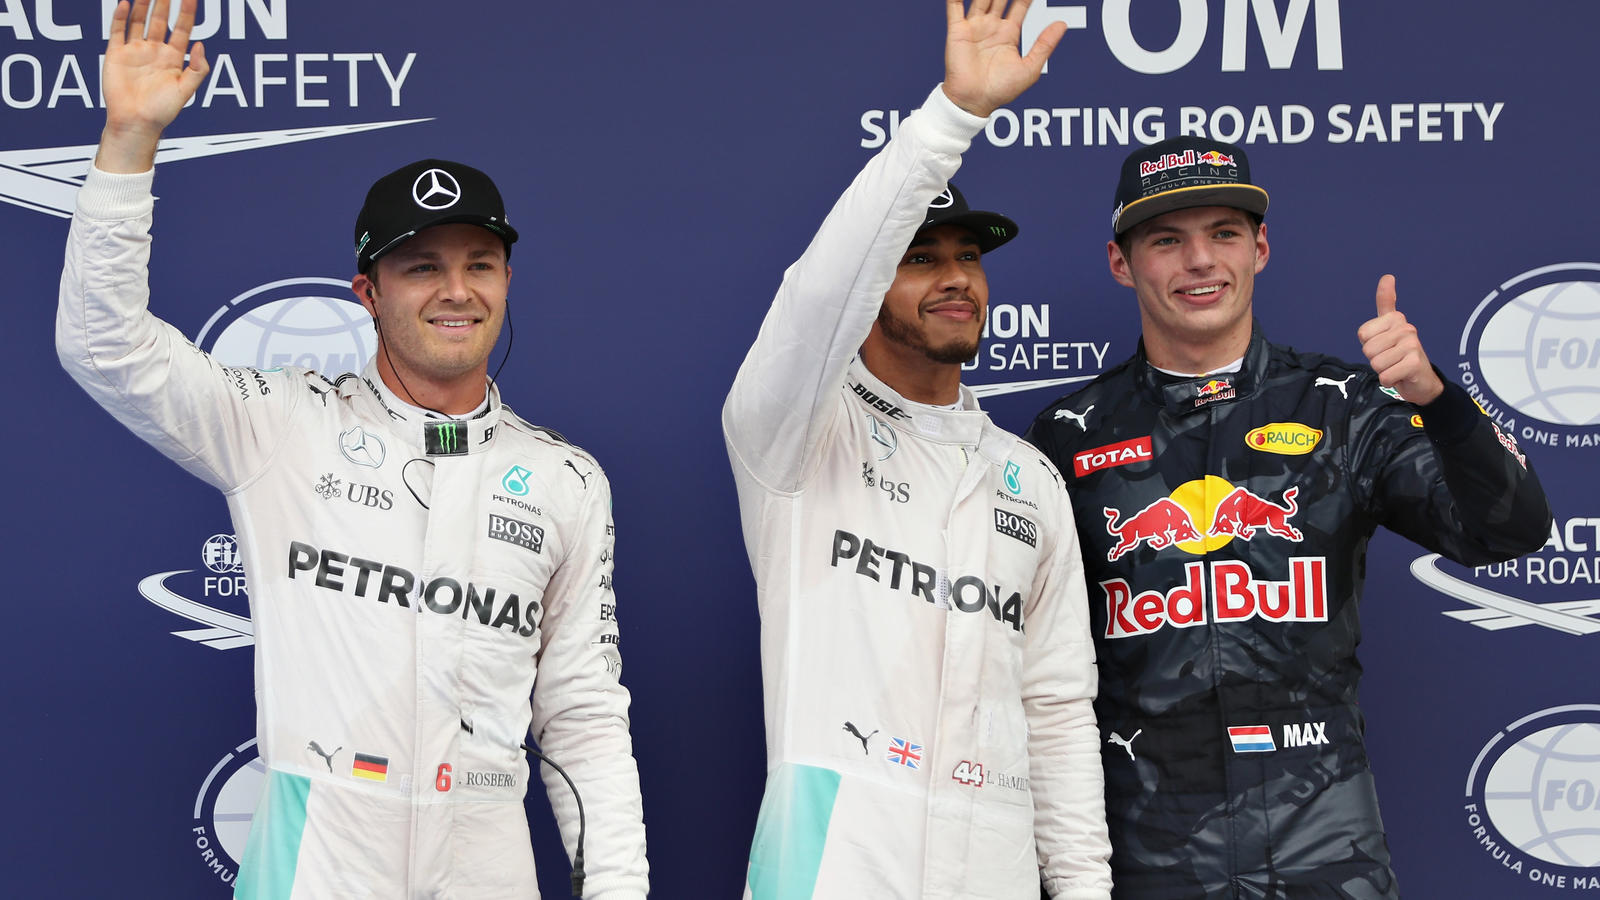 KUALA LUMPUR, MALAYSIA - OCTOBER 01:  Top three qualifiers Lewis Hamilton of Great Britain and Mercedes GP, Nico Rosberg of Germany and Mercedes GP and Max Verstappen of Netherlands and Red Bull Racing wave to the crowd in parc ferme during qualifyin